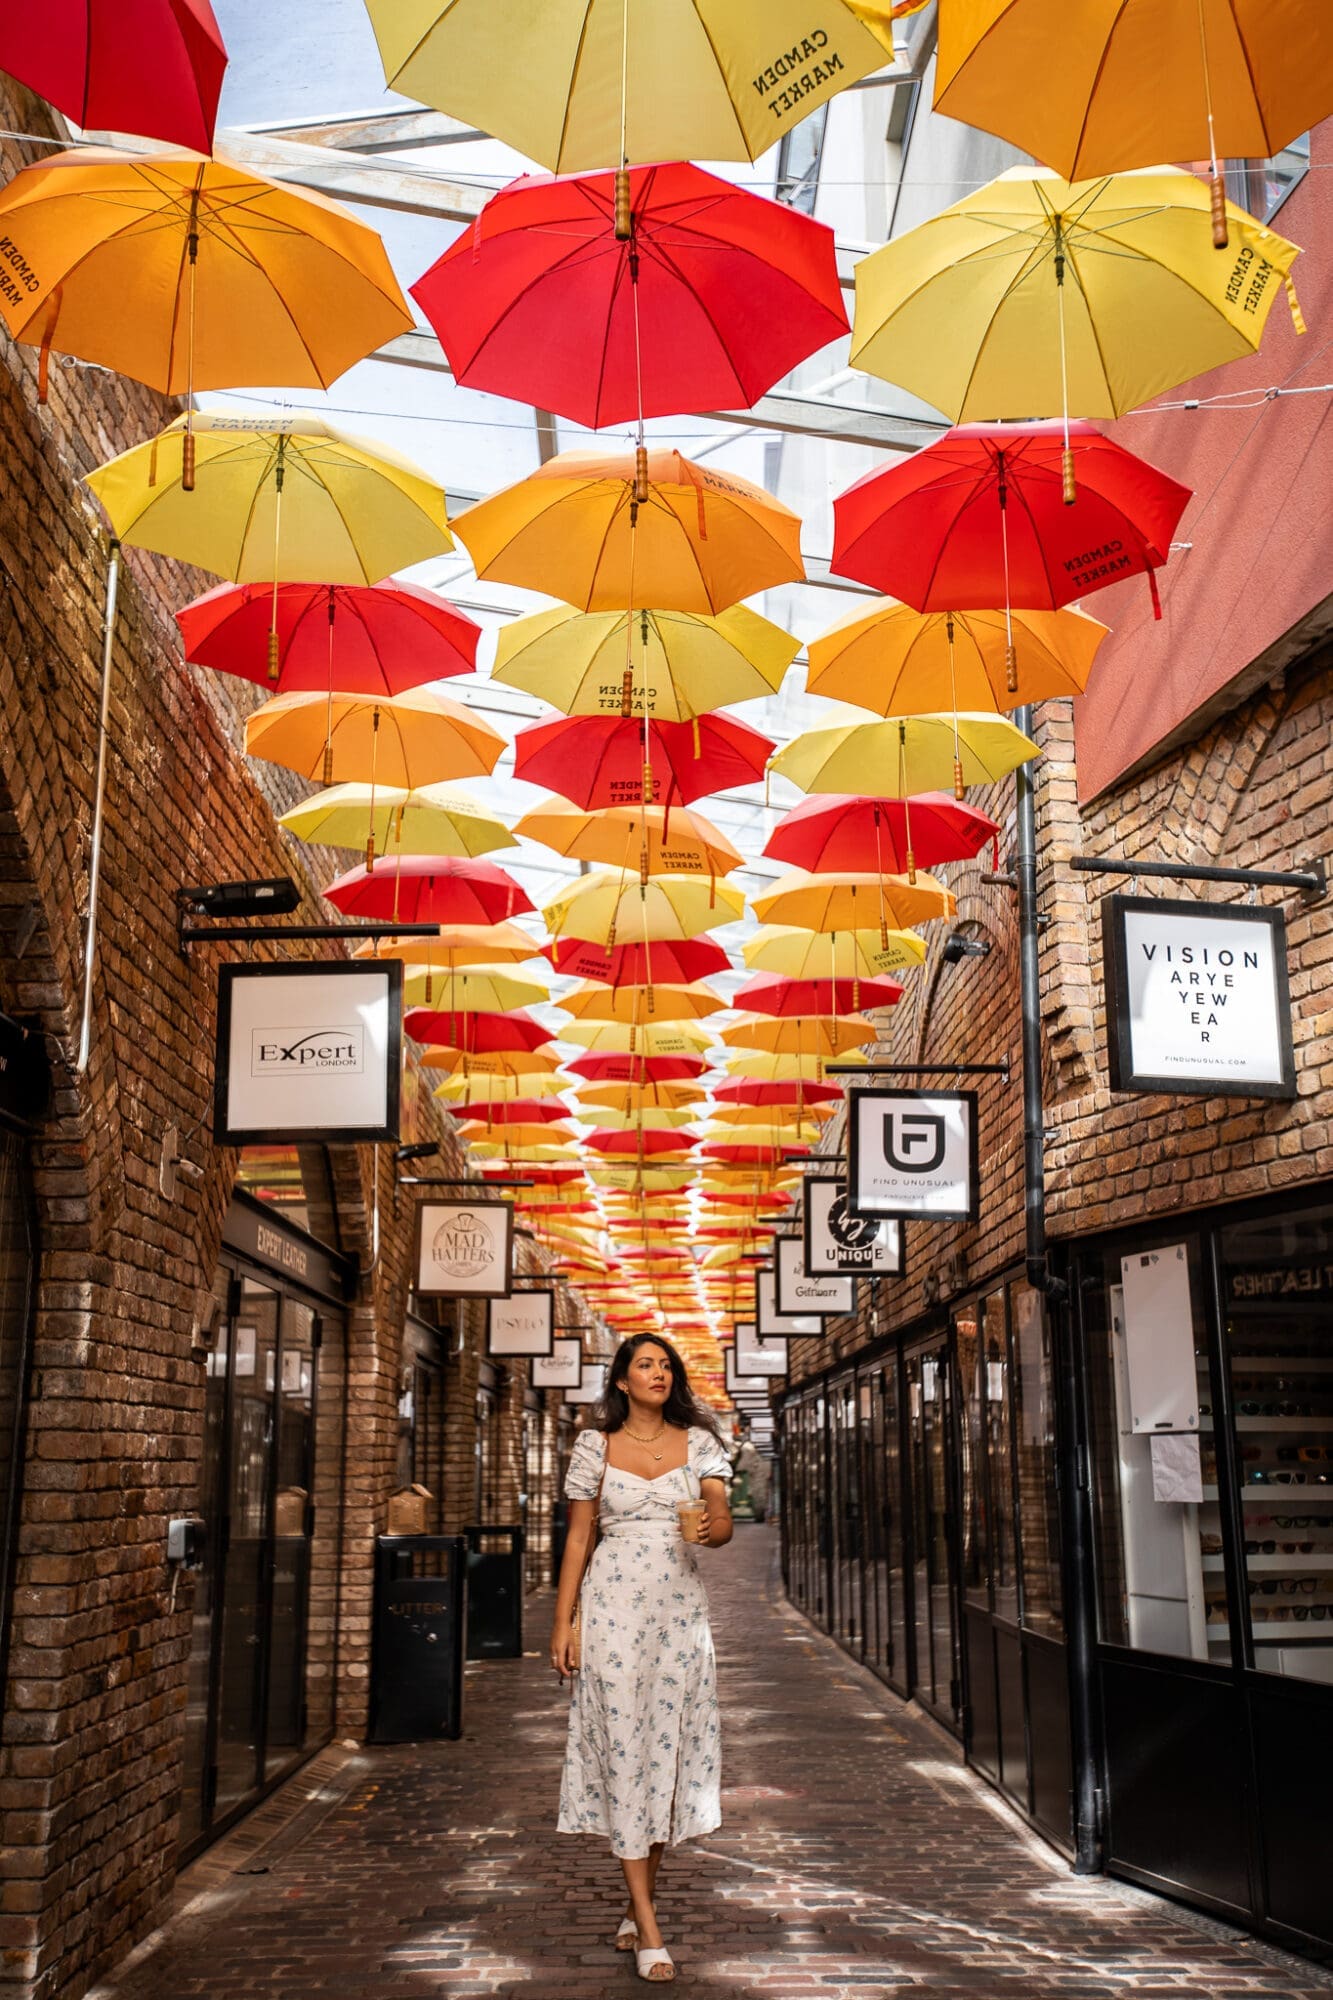 Anoushka in a white sun dress walking under a canopy of colourful umbrellas in Camden Market